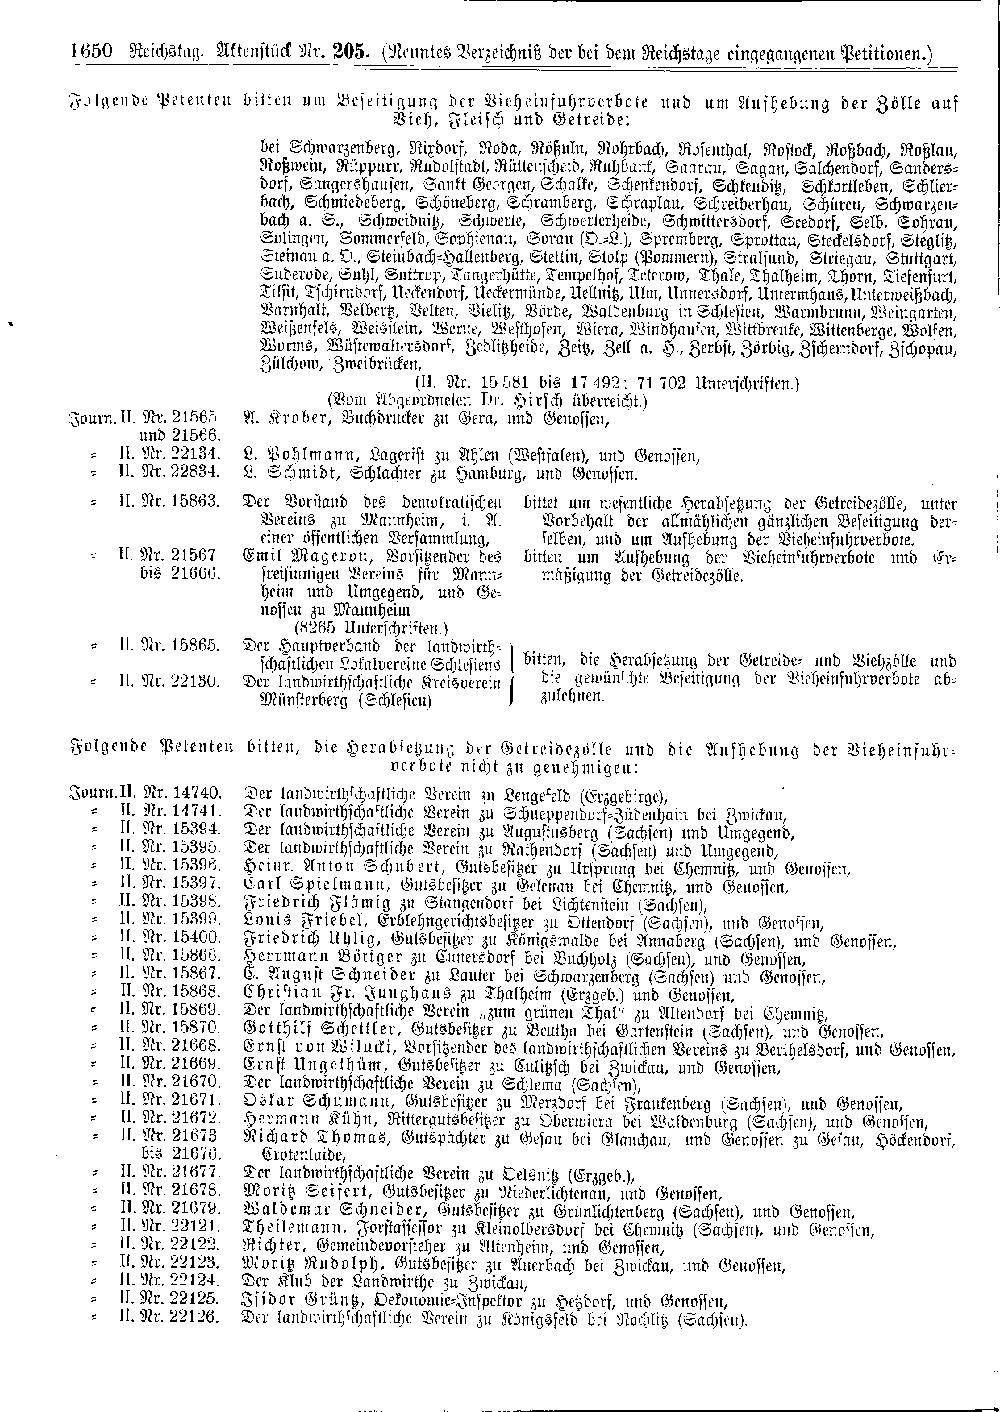 Scan of page 1650